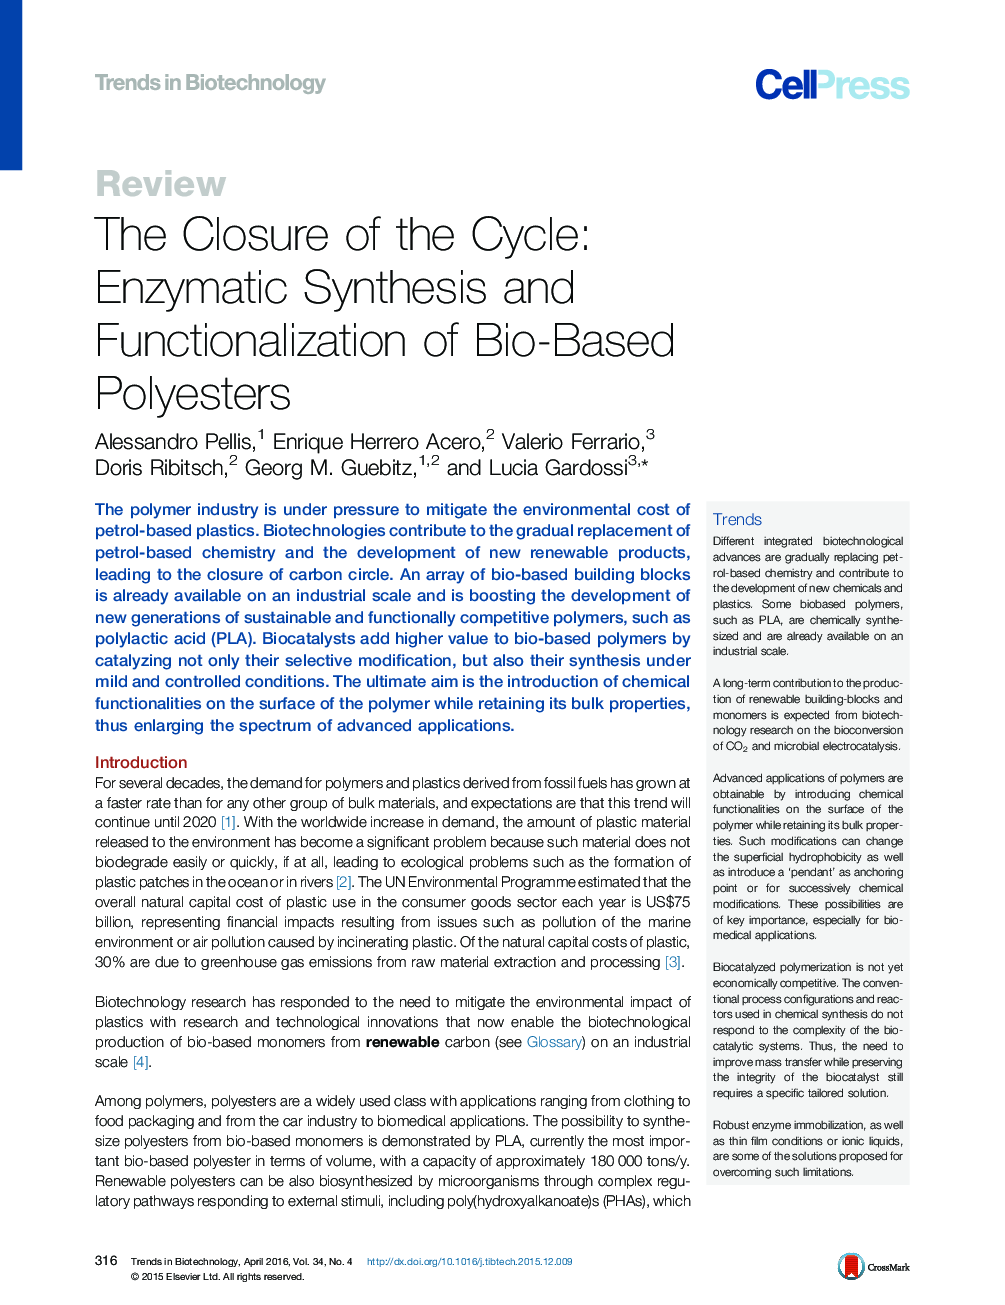 The Closure of the Cycle: Enzymatic Synthesis and Functionalization of Bio-Based Polyesters